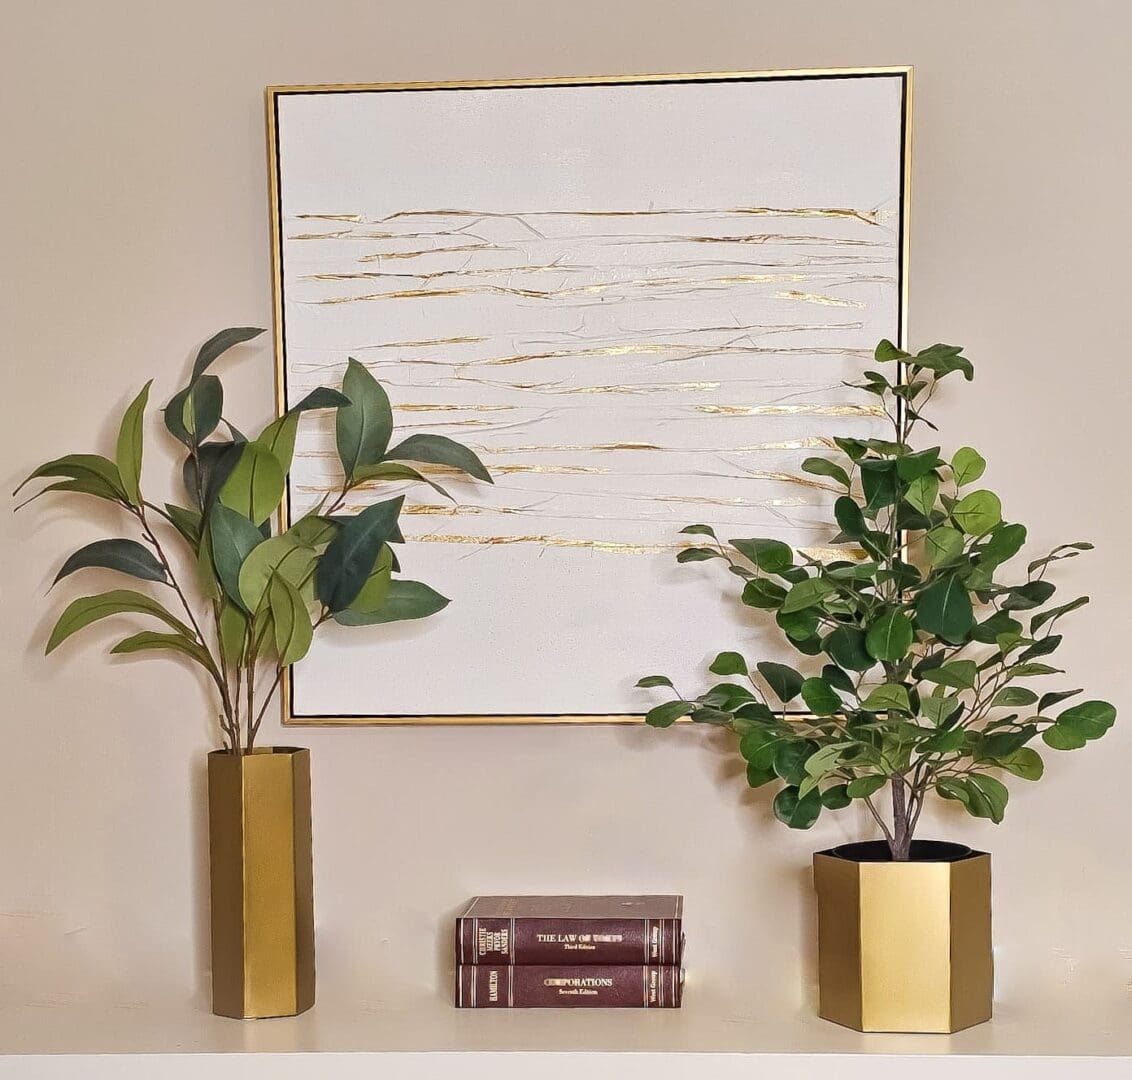 A couple of plants in front of a painting.